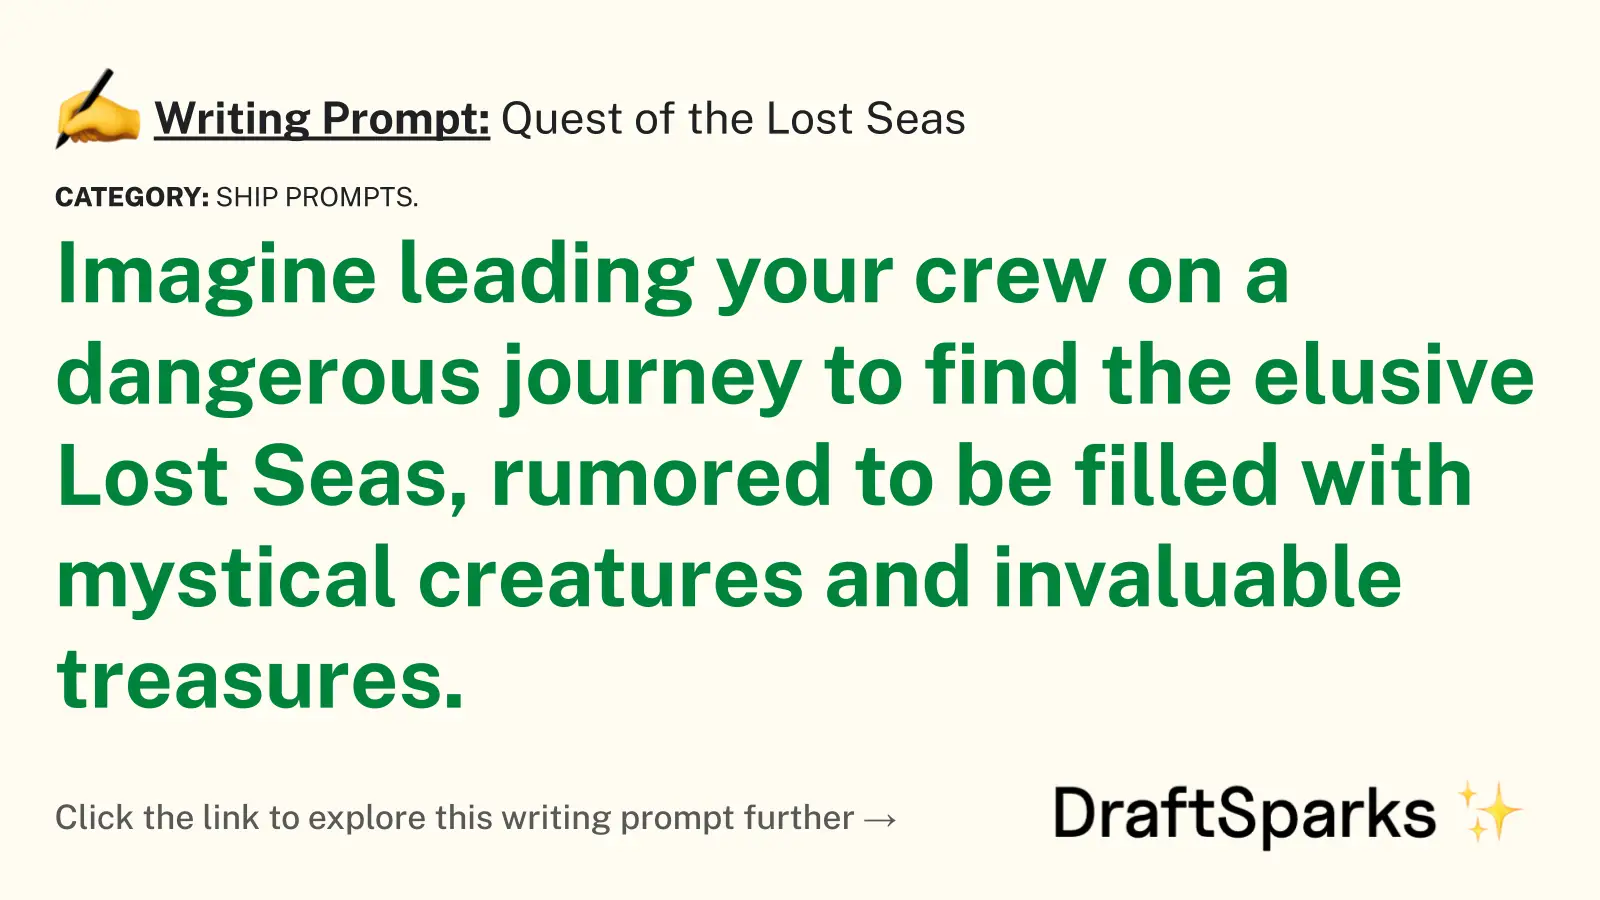 Quest of the Lost Seas